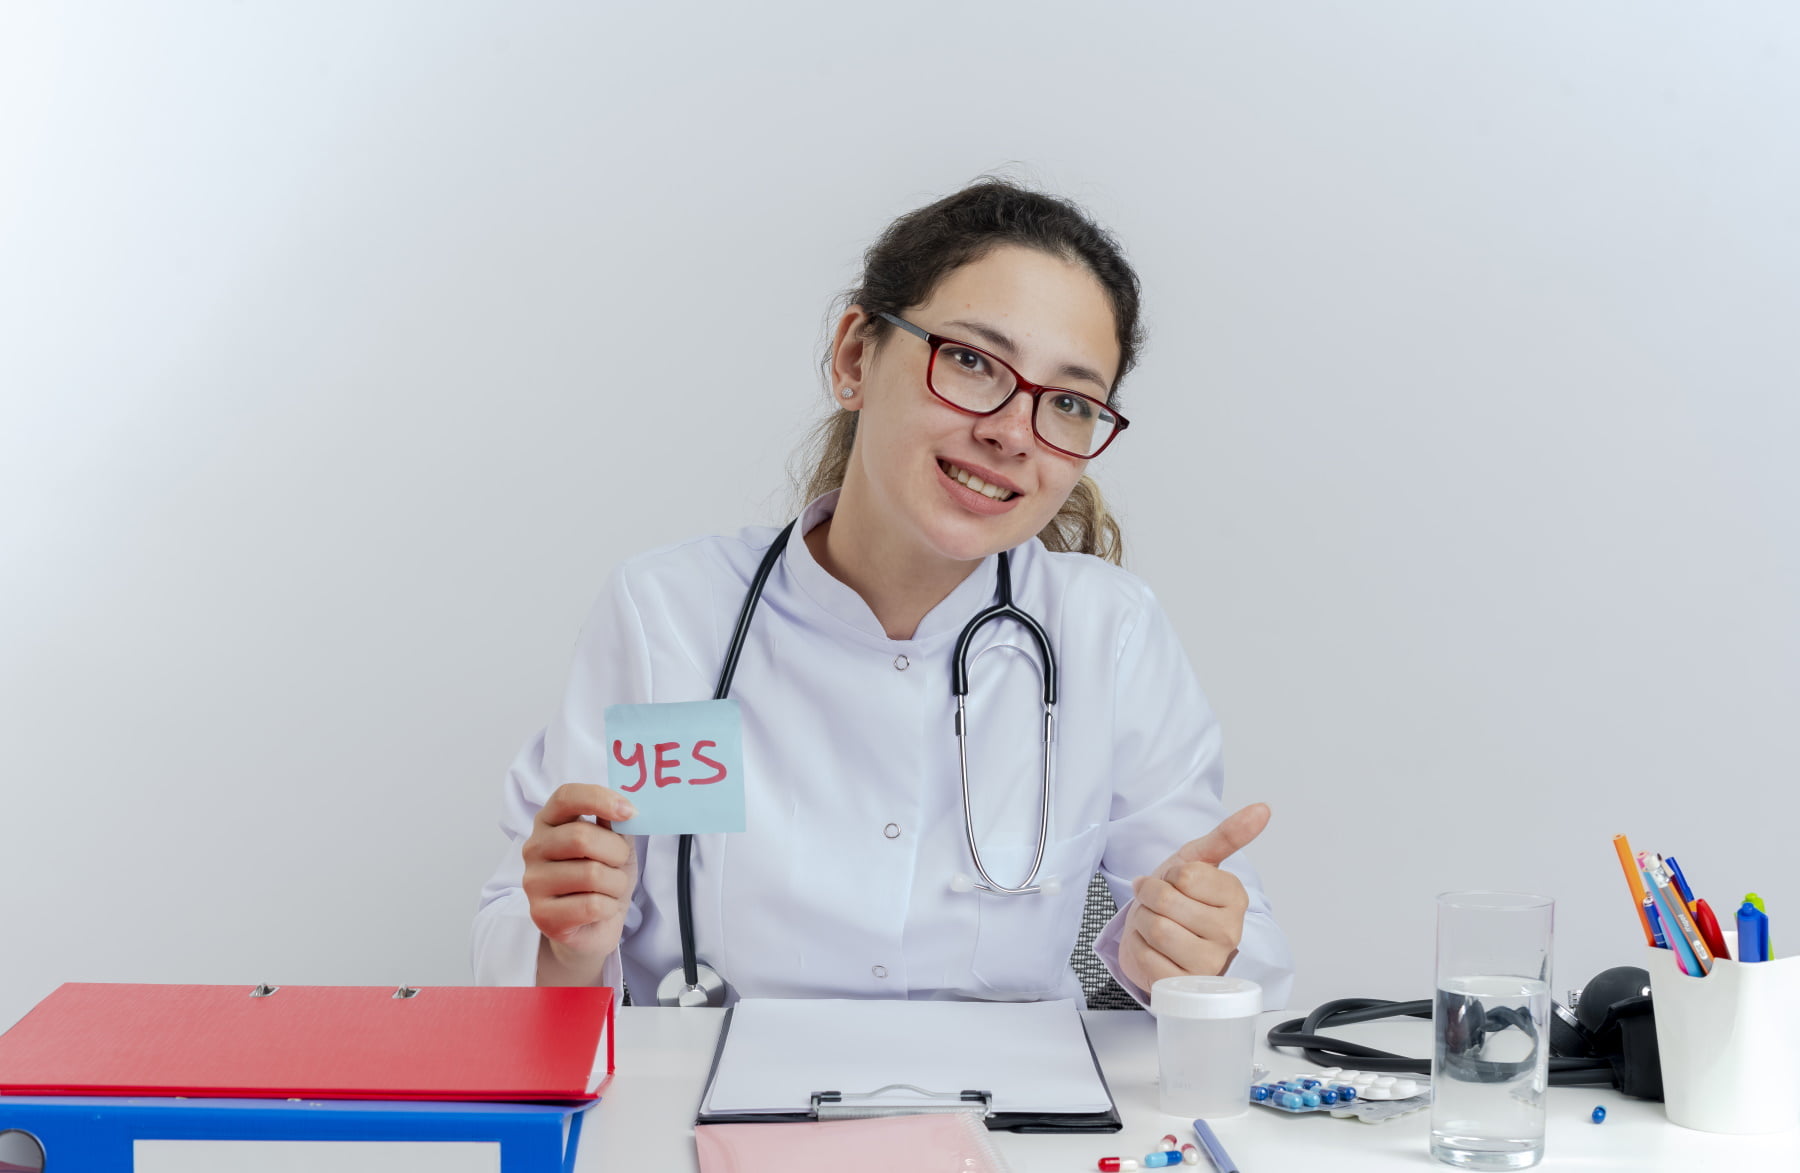 smiling young female doctor wearing medical robe and stethoscope and glasses sitting at desk with medical tools looking at camera holding yes note showing thumb up isolated on white background